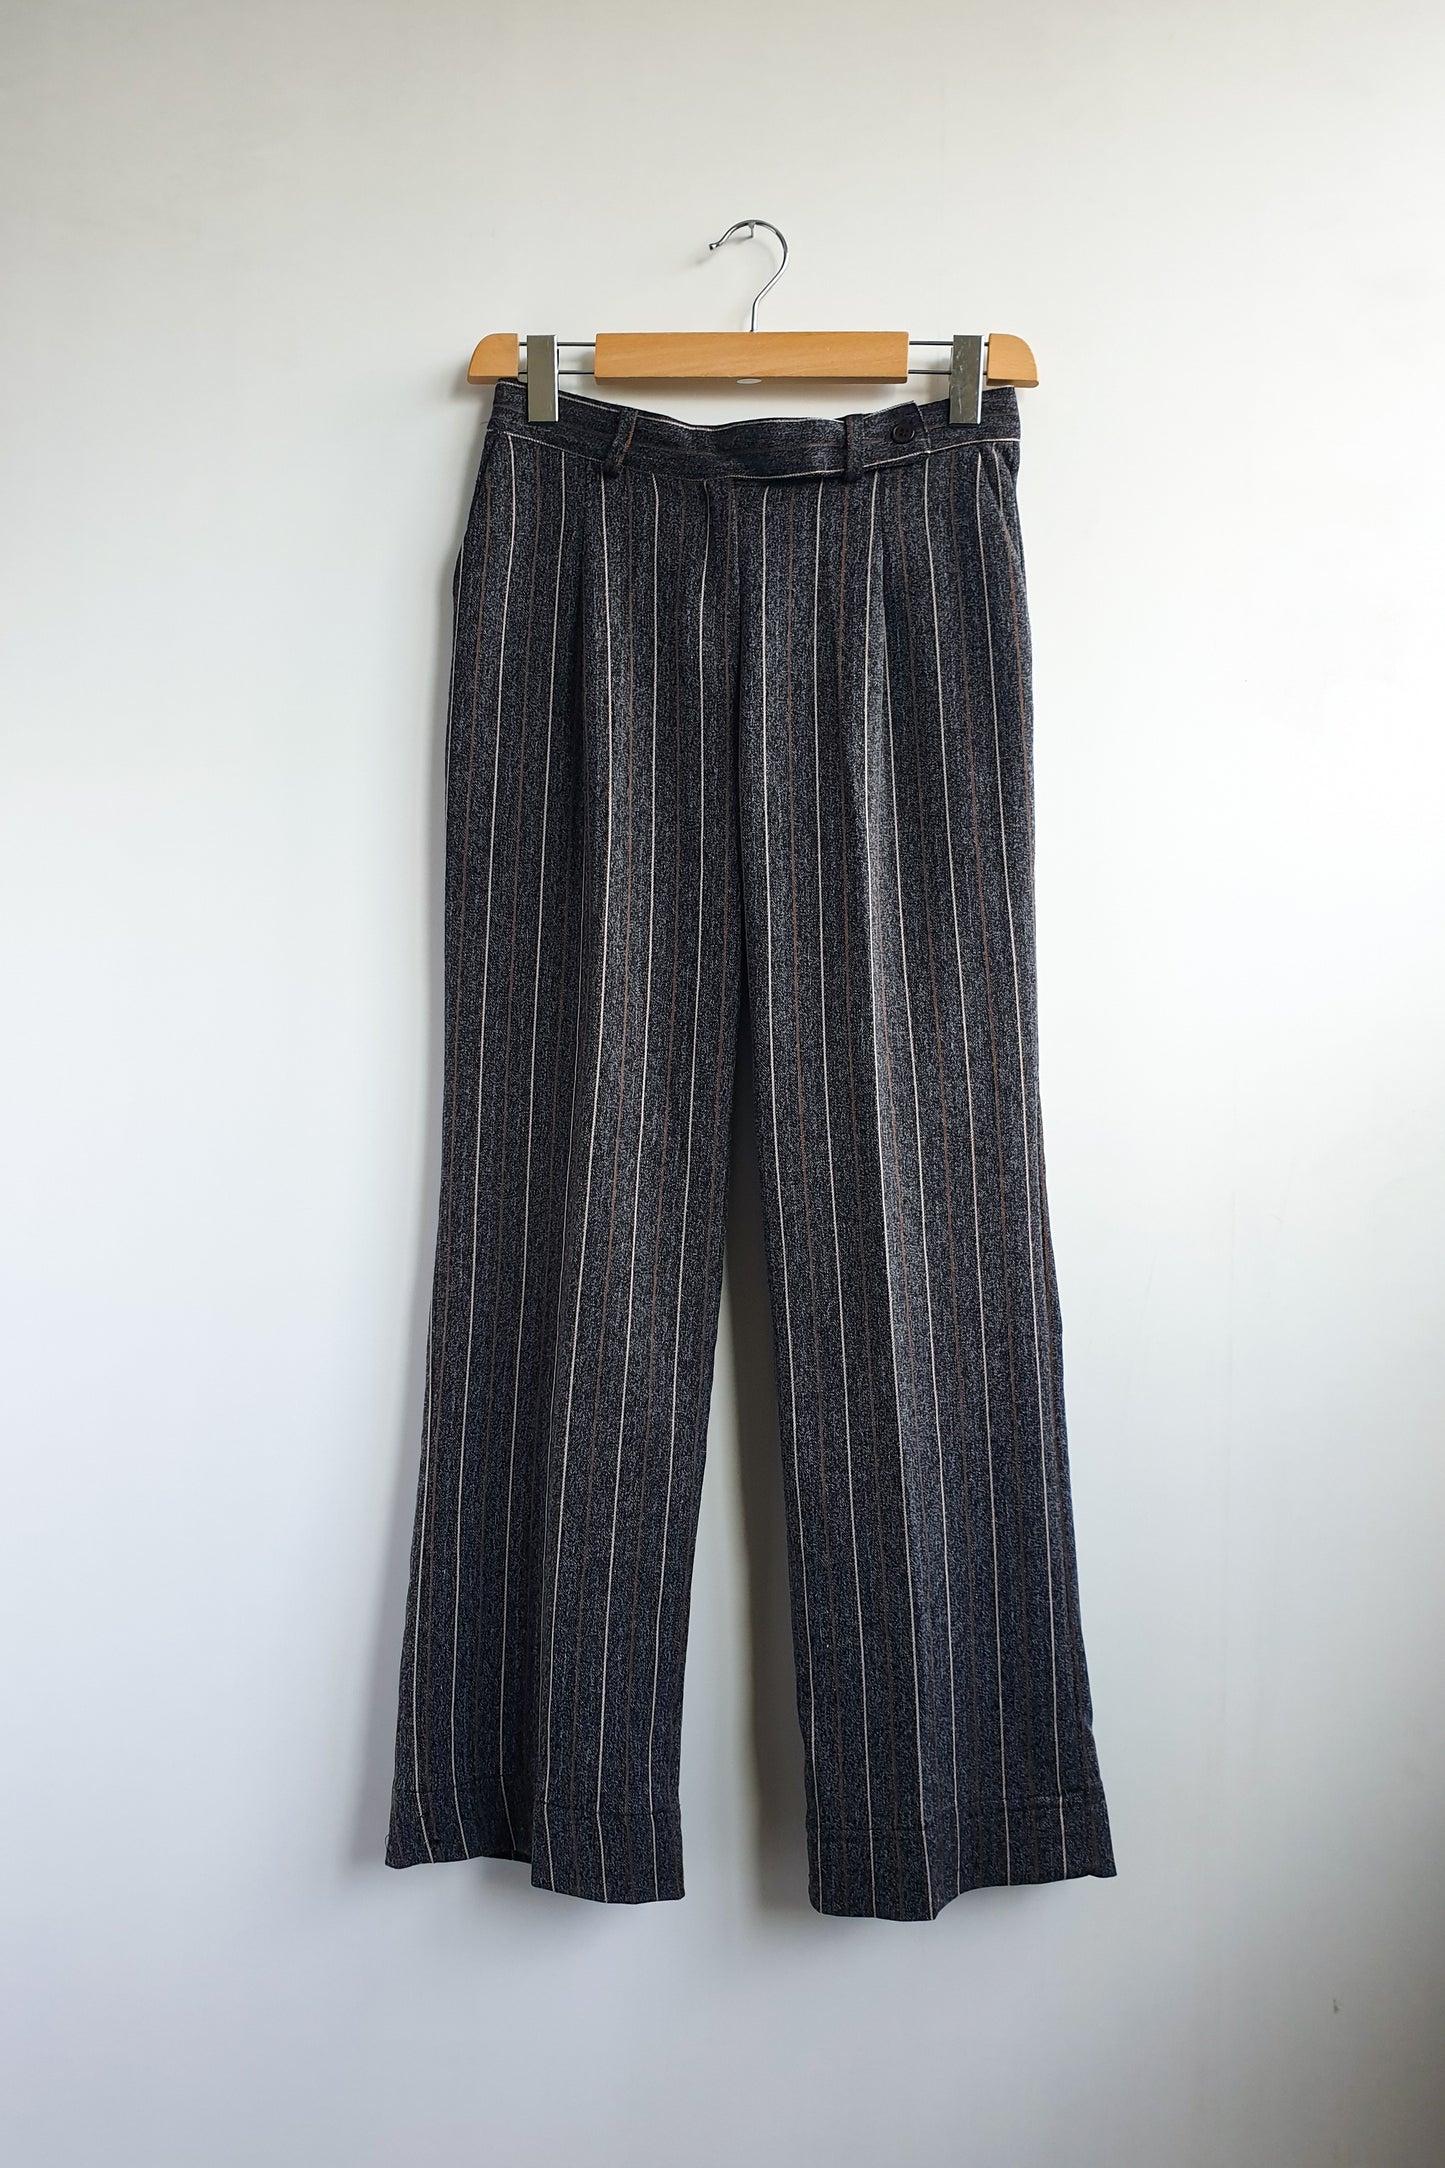 PINSTRIPED GRAY TROUSERS - 36